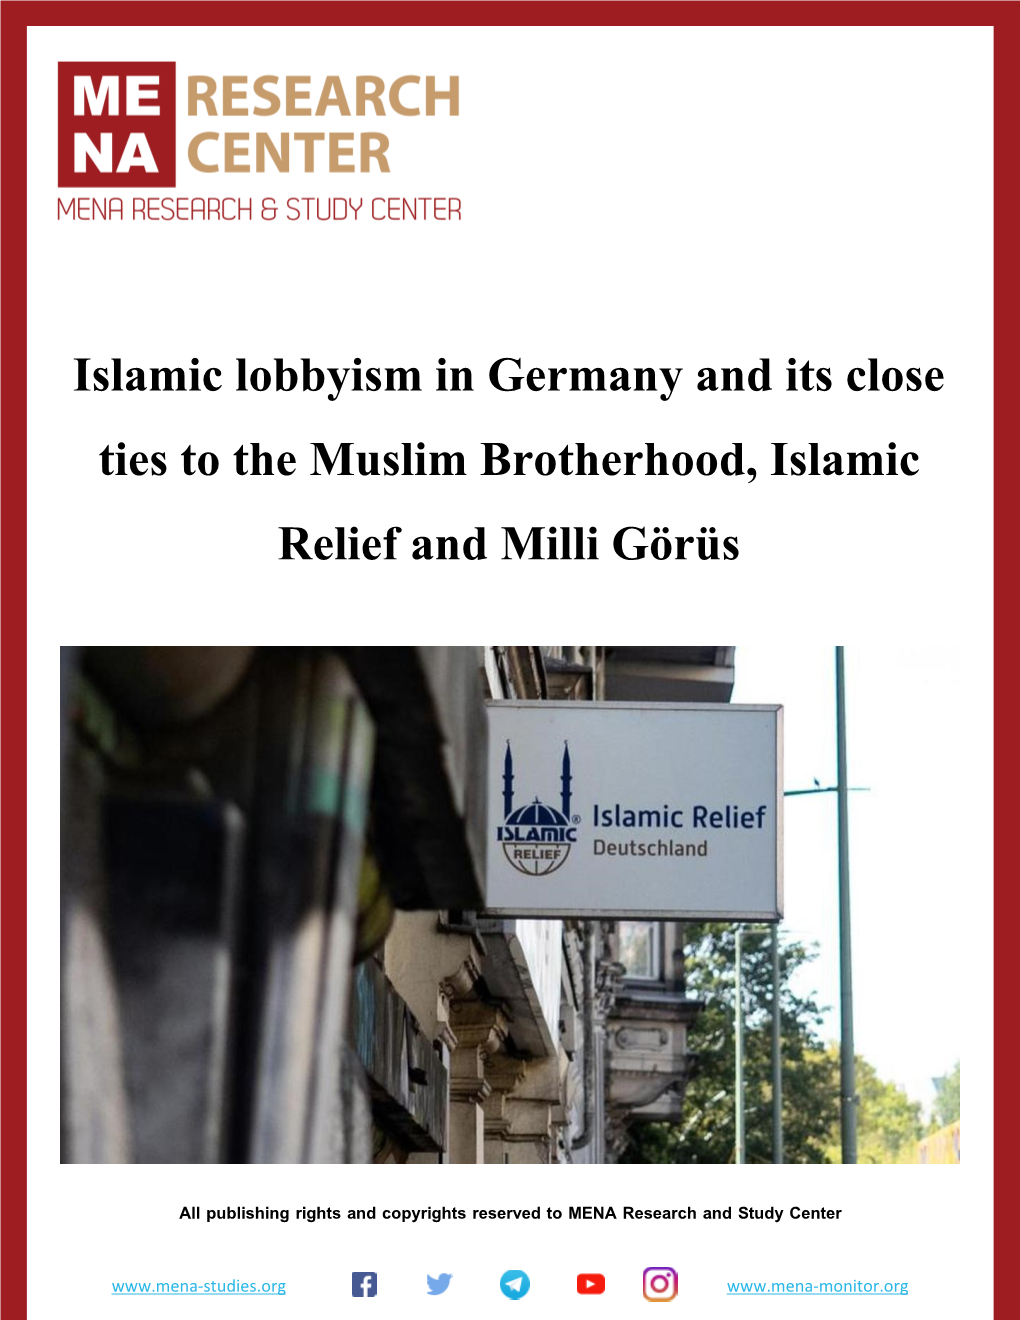 Islamic Lobbyism in Germany and Its Close Ties to the Muslim Brotherhood, Islamic Relief and Milli Görüs